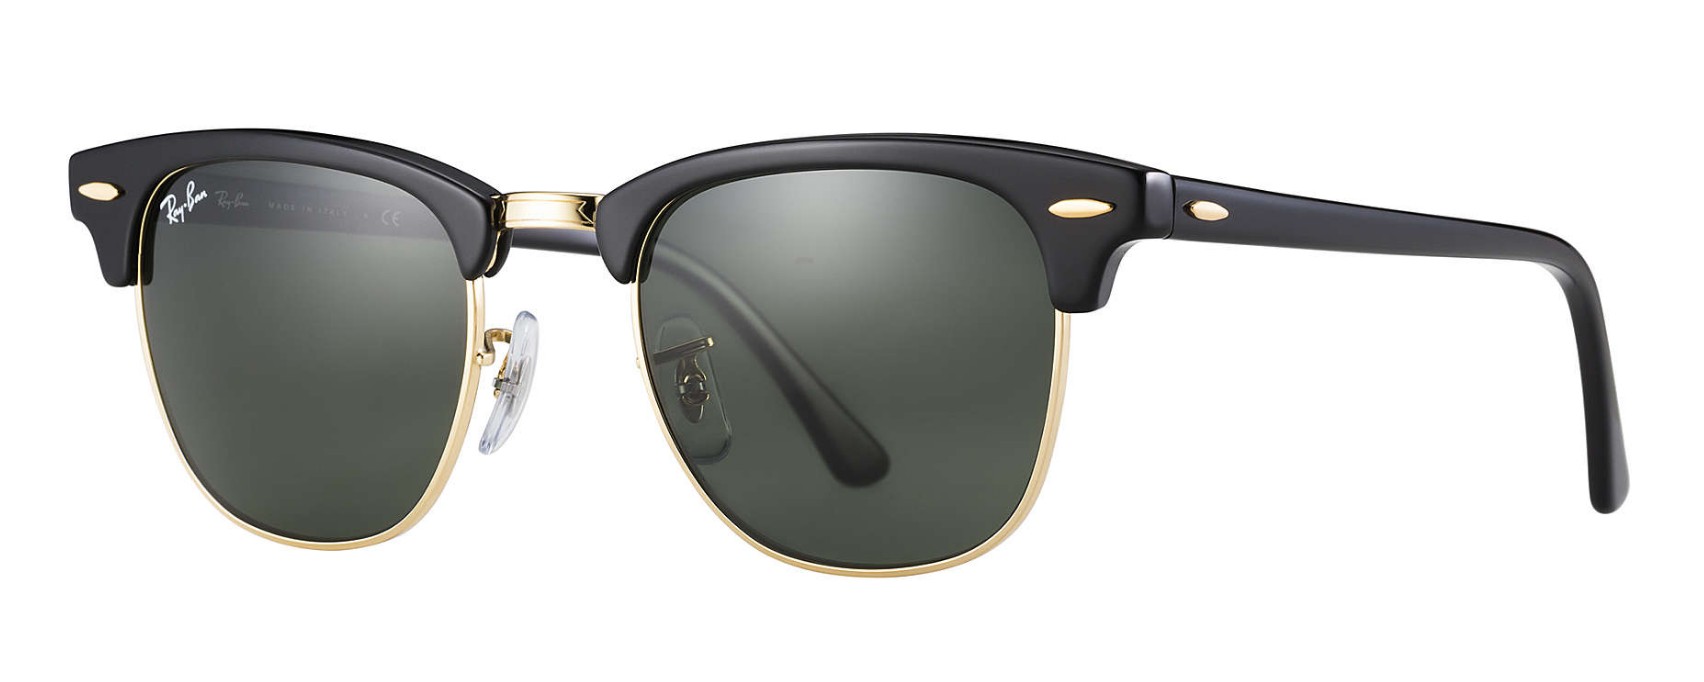 Ray-Ban Clubmaster Classic Review | Tested & Rated